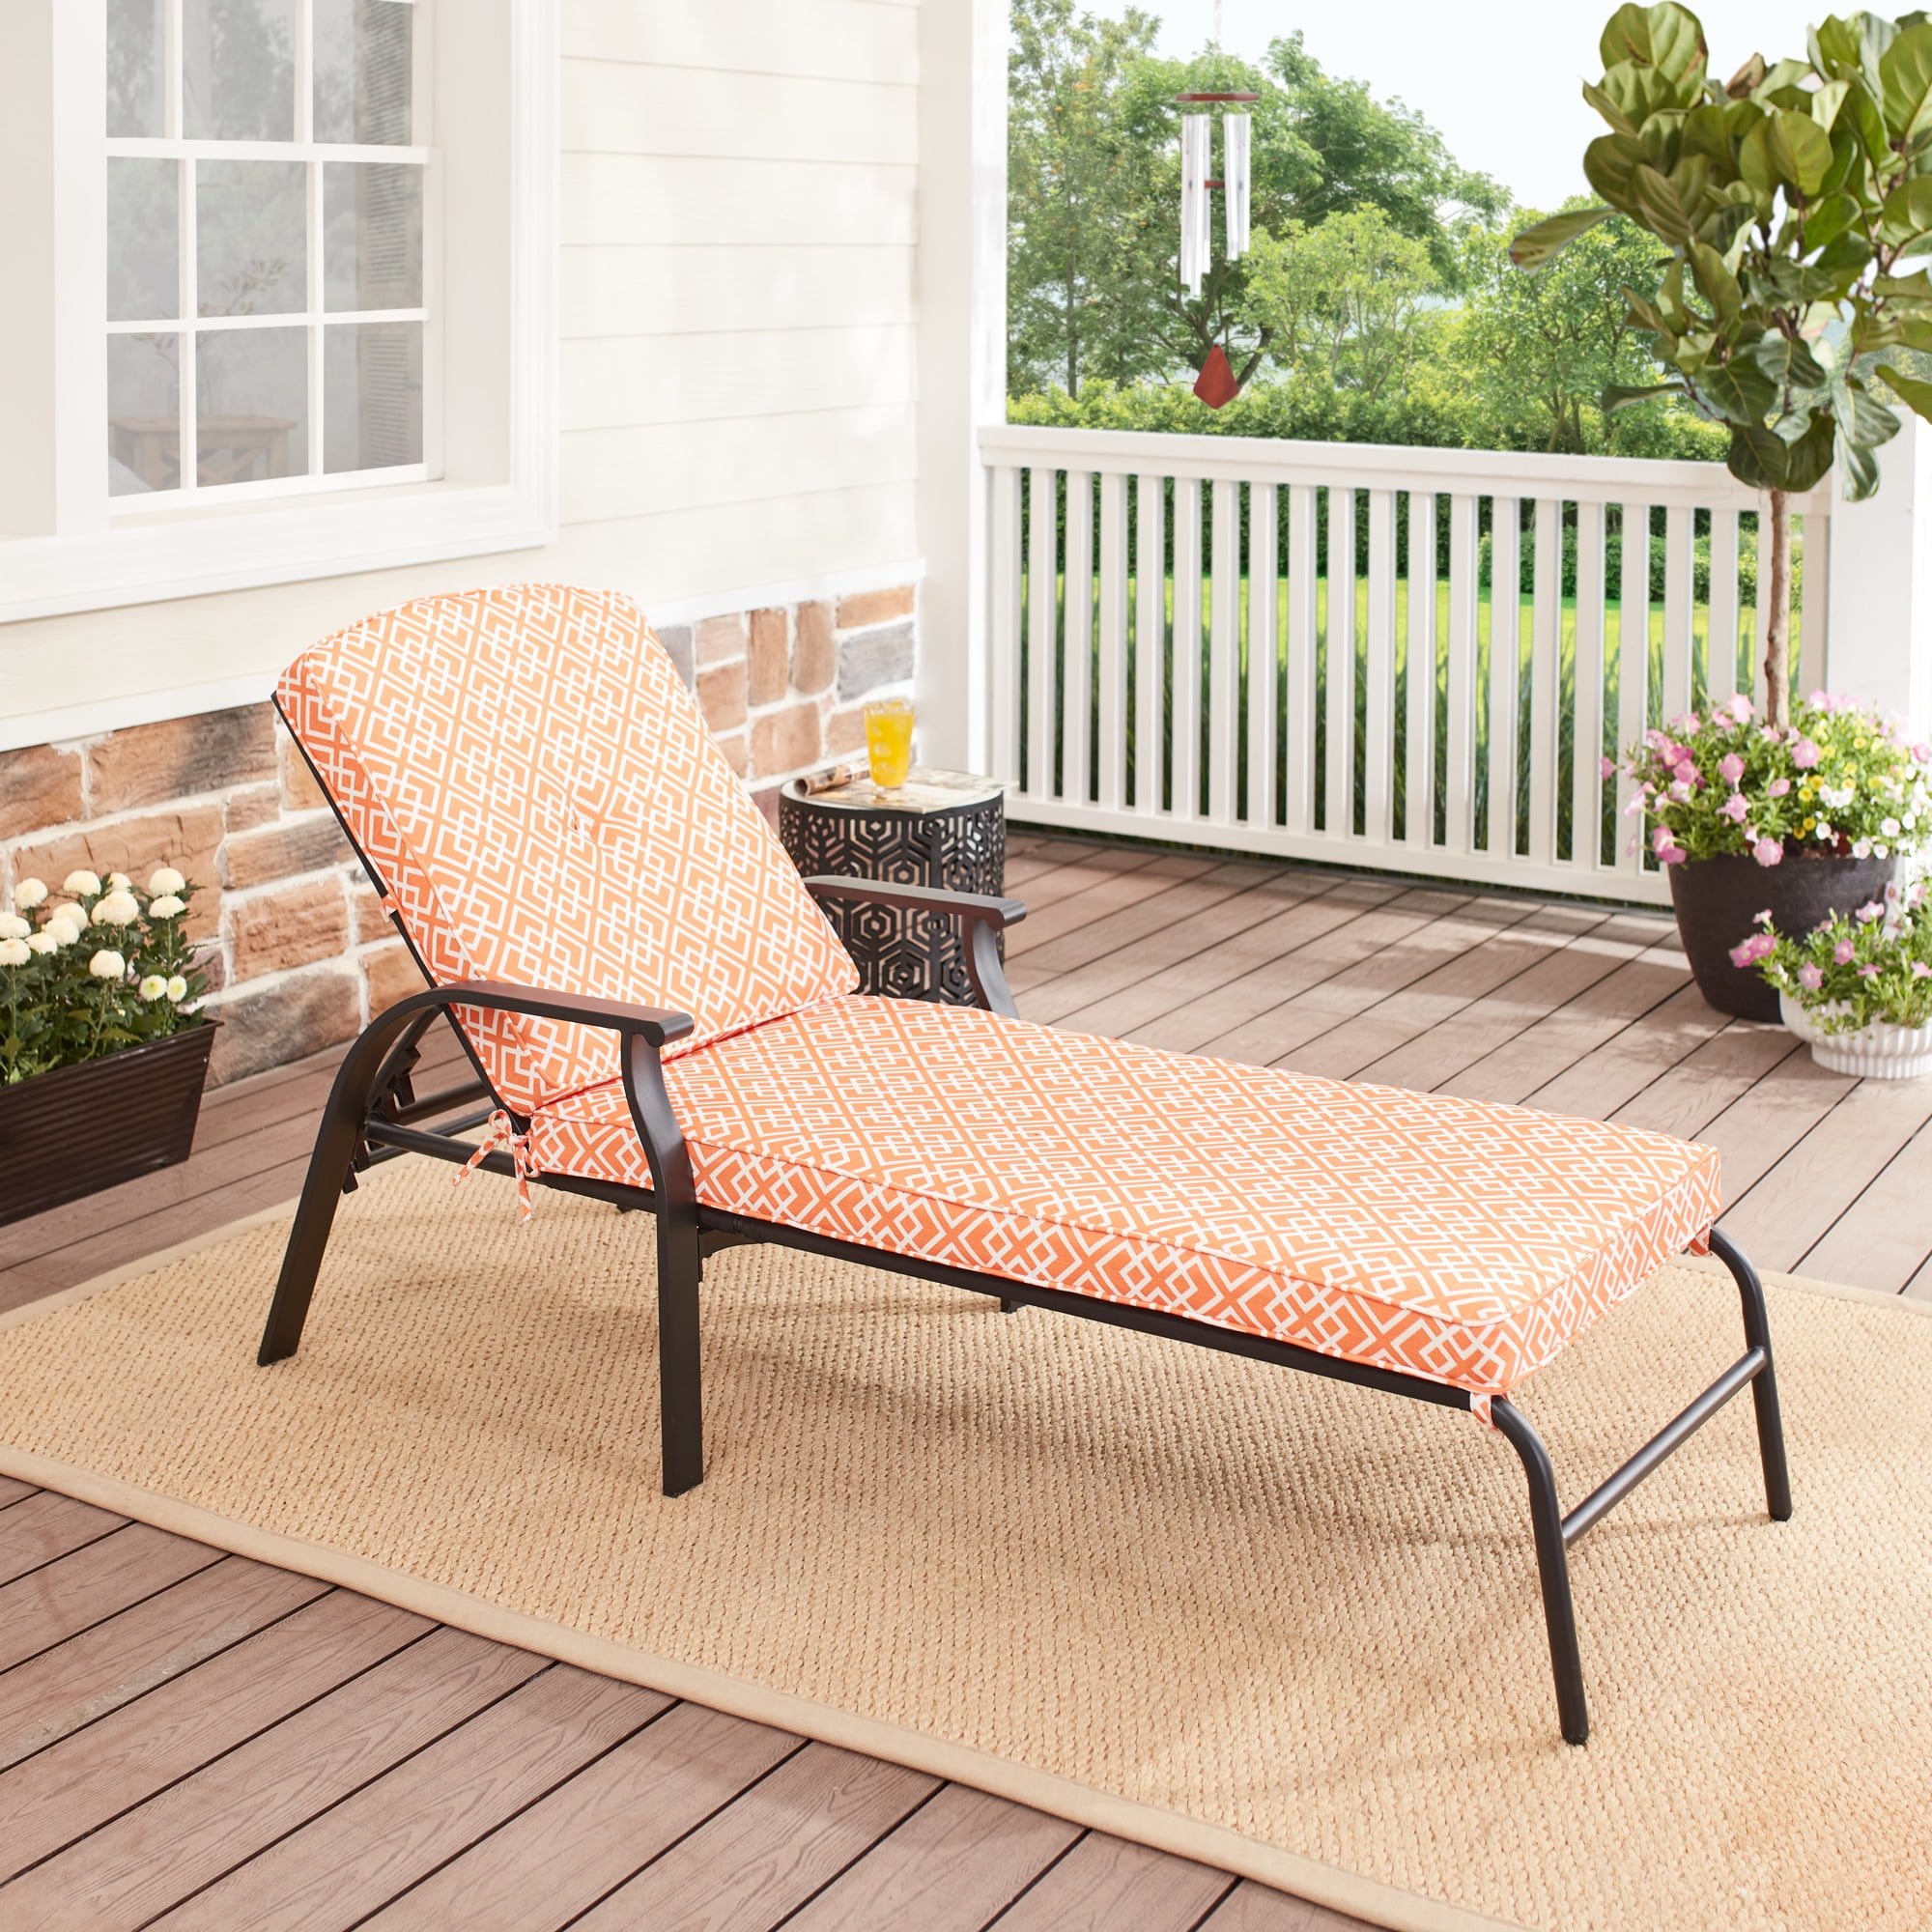 Details about   NEW Belden Park Outdoor Chaise Lounge w/ Cushions for Patio & Deck by Mainstays 